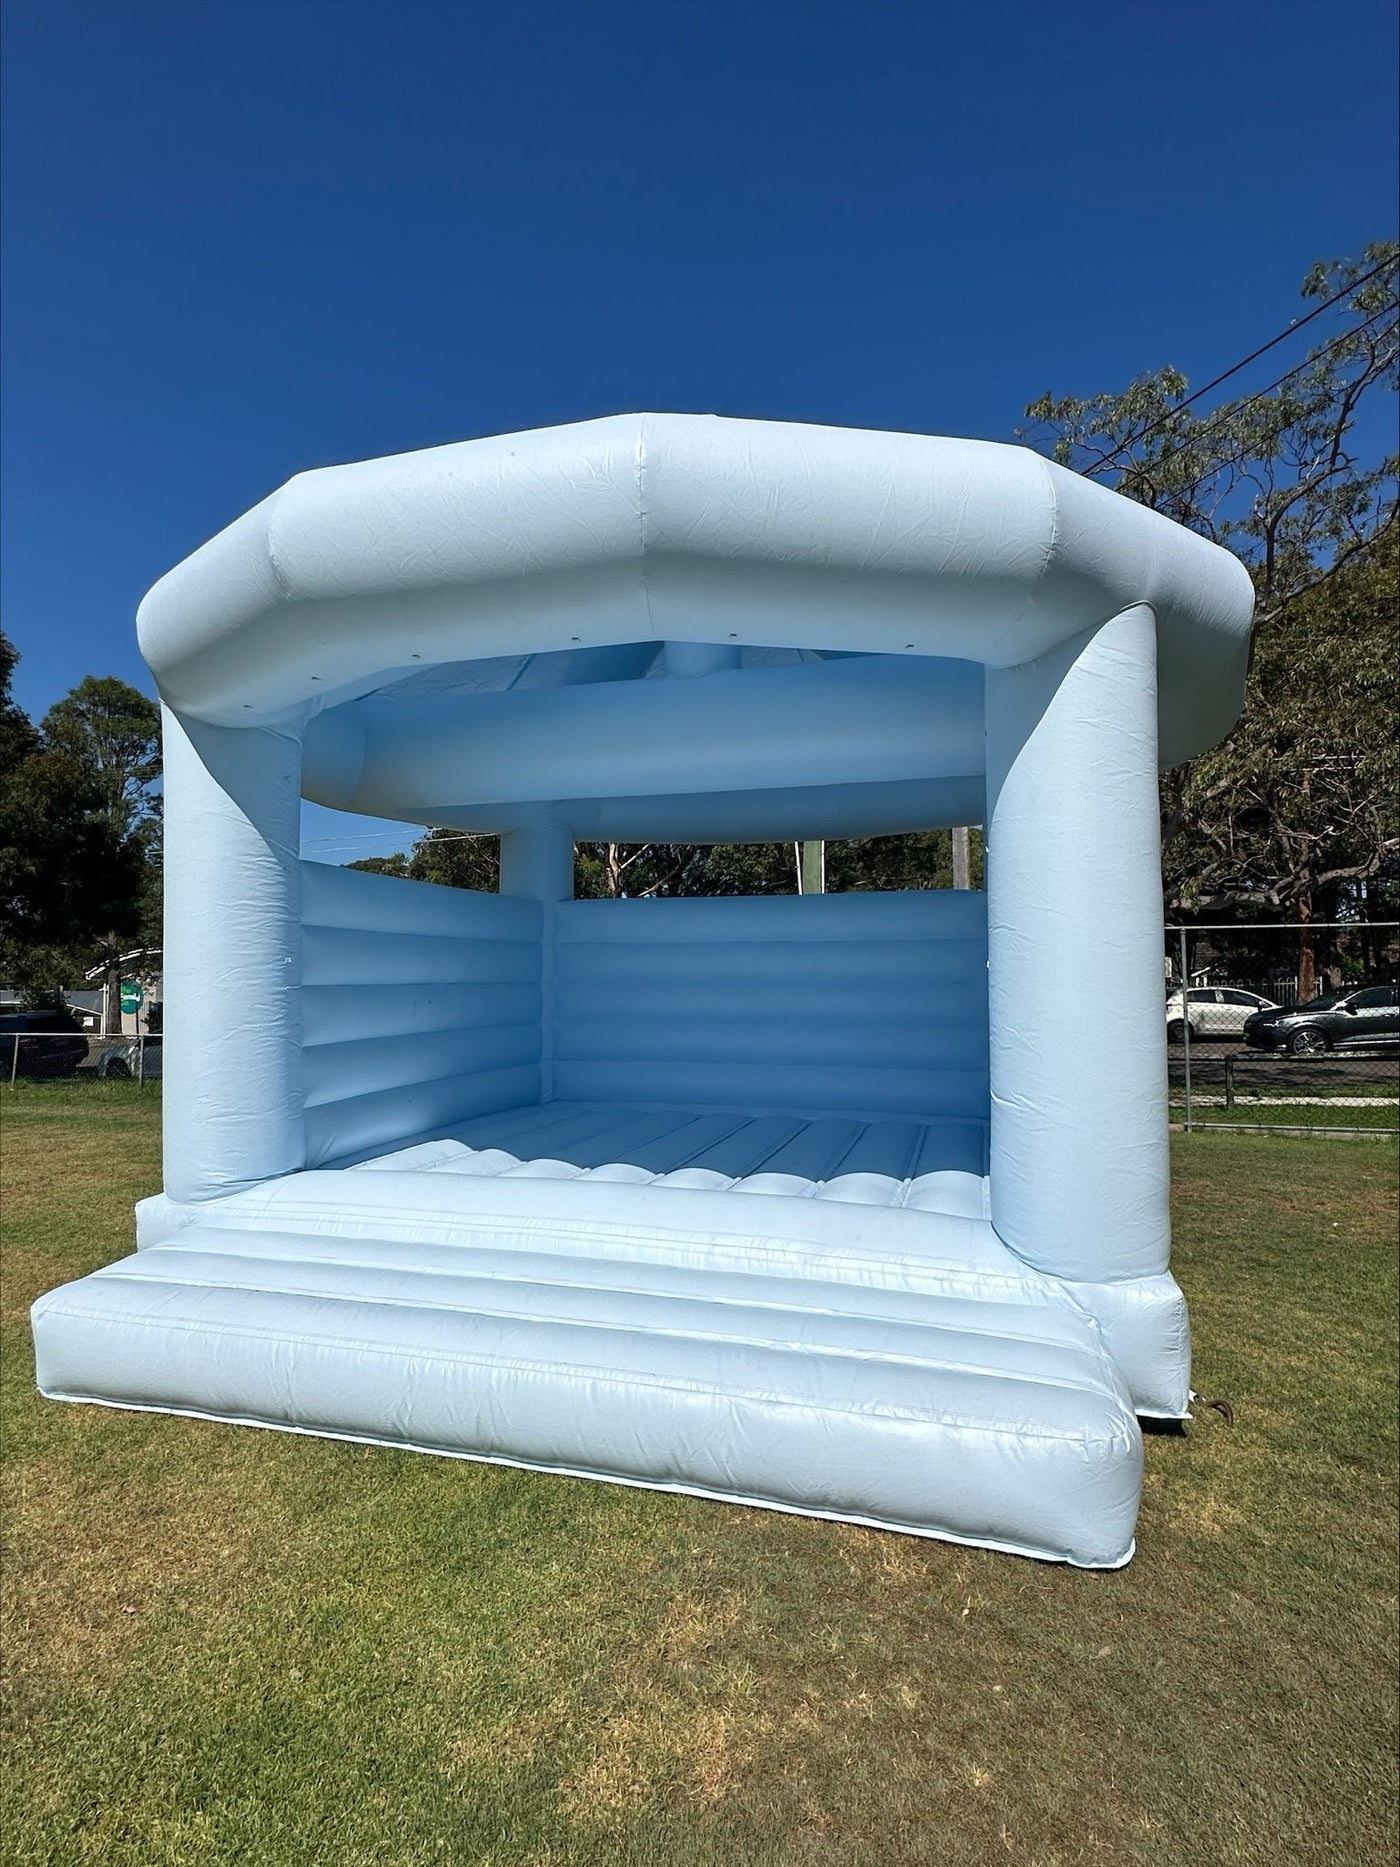 Blue Jumping Castle